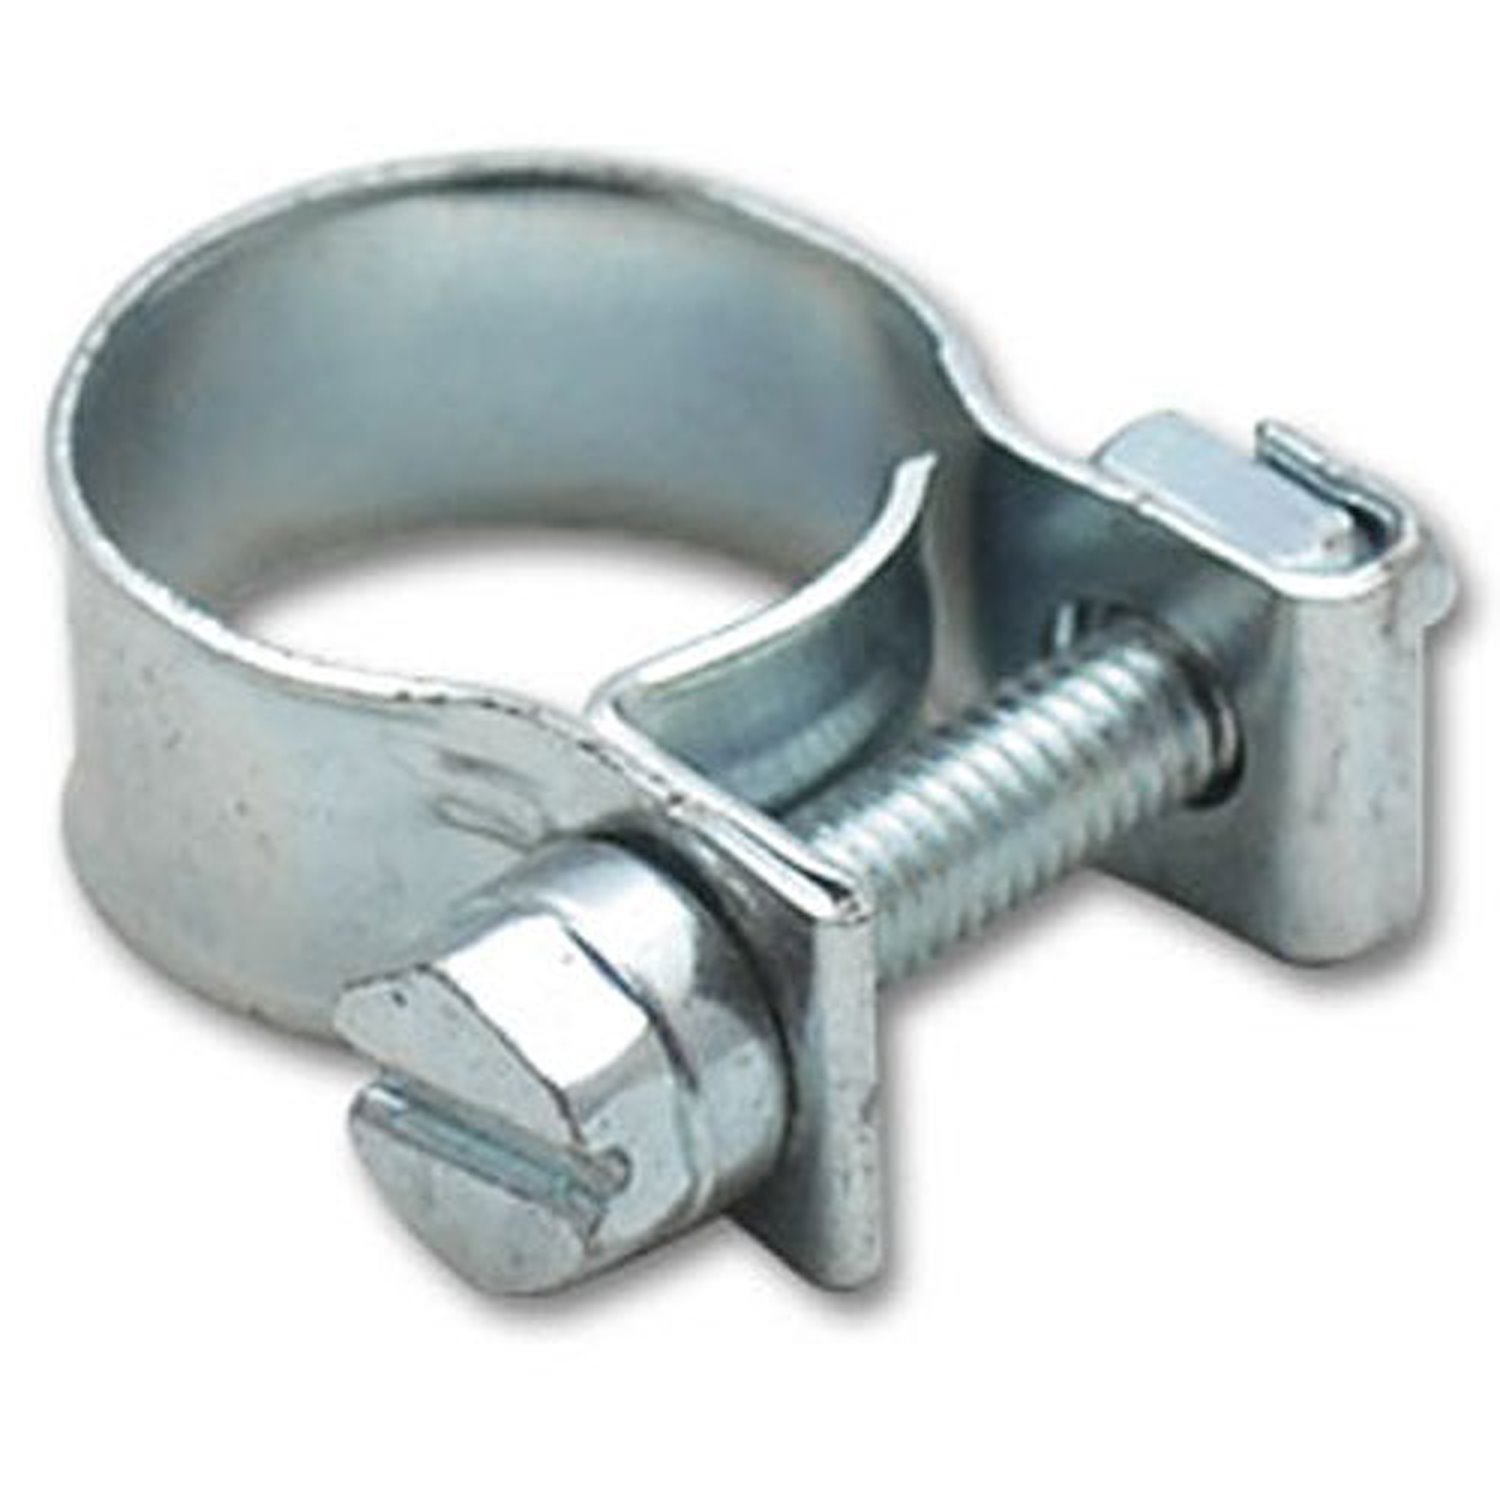 Fuel Injector Style Mini Hose Clamps 13mm - 15mm